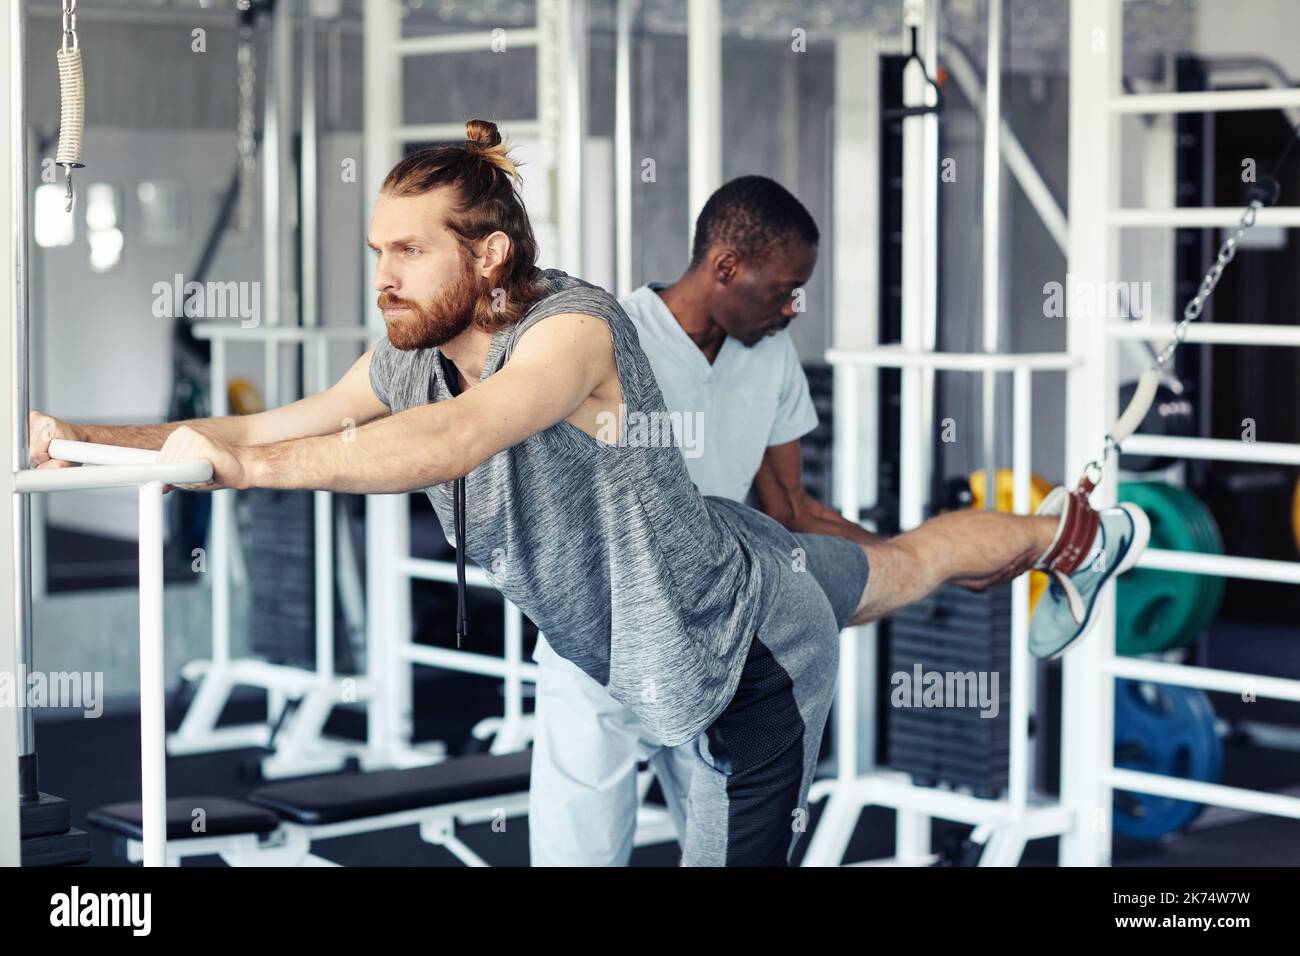 Young patient stretching his injury leg on sport equipment in gym with therapist helping him Stock Photo